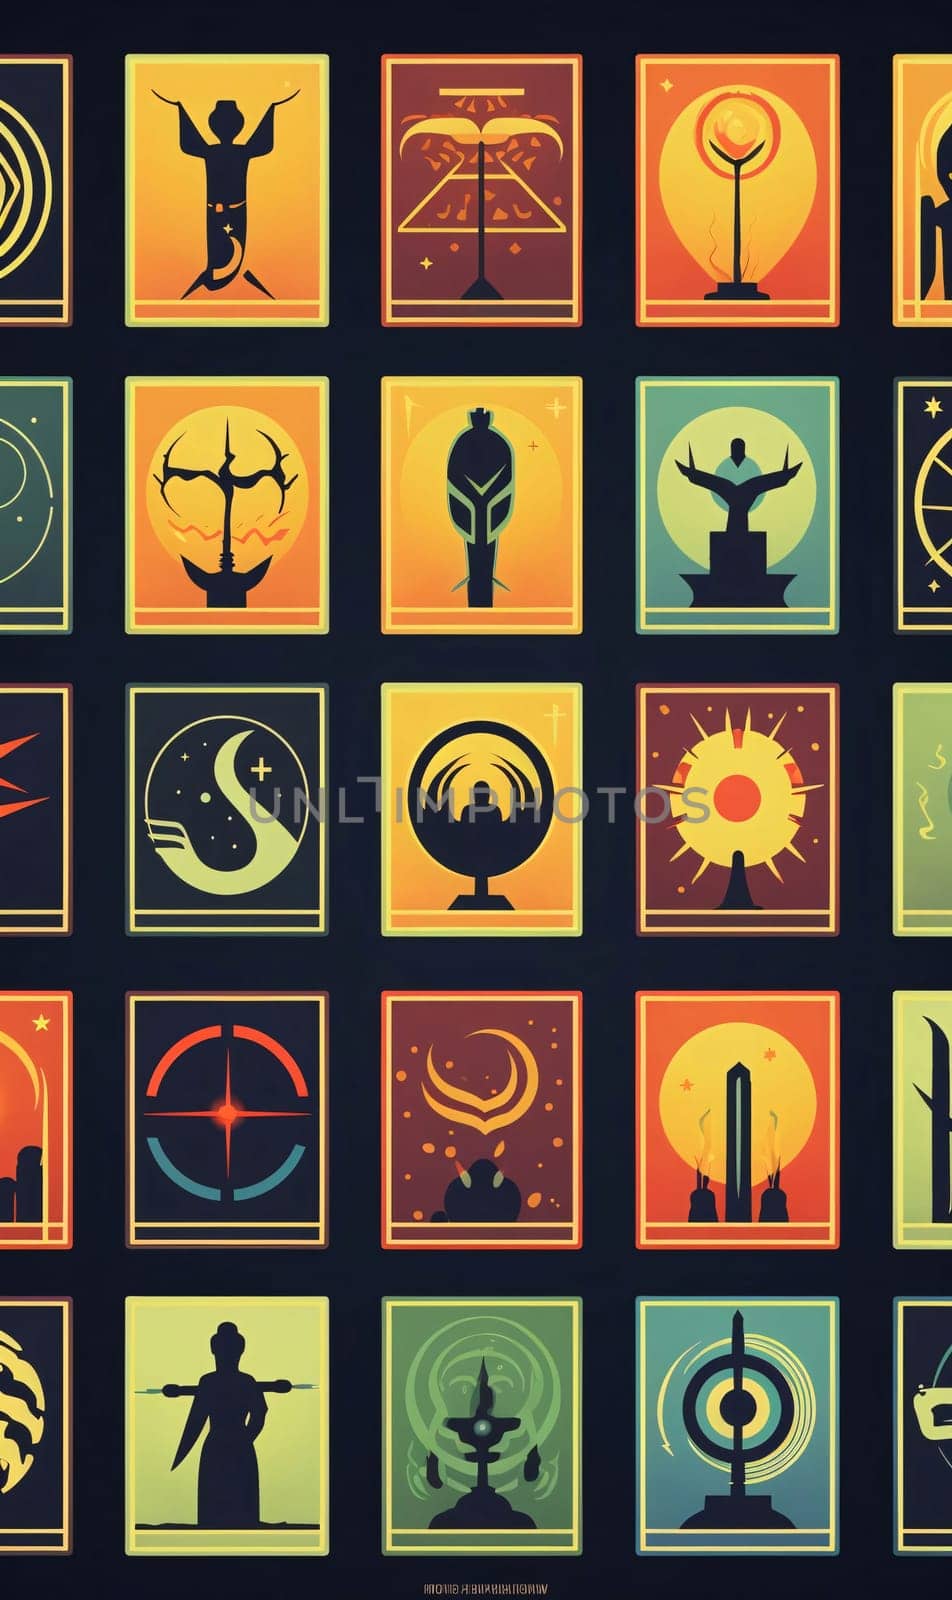 New icons collection: Set of vector icons in retro style on the theme of the ancient world.